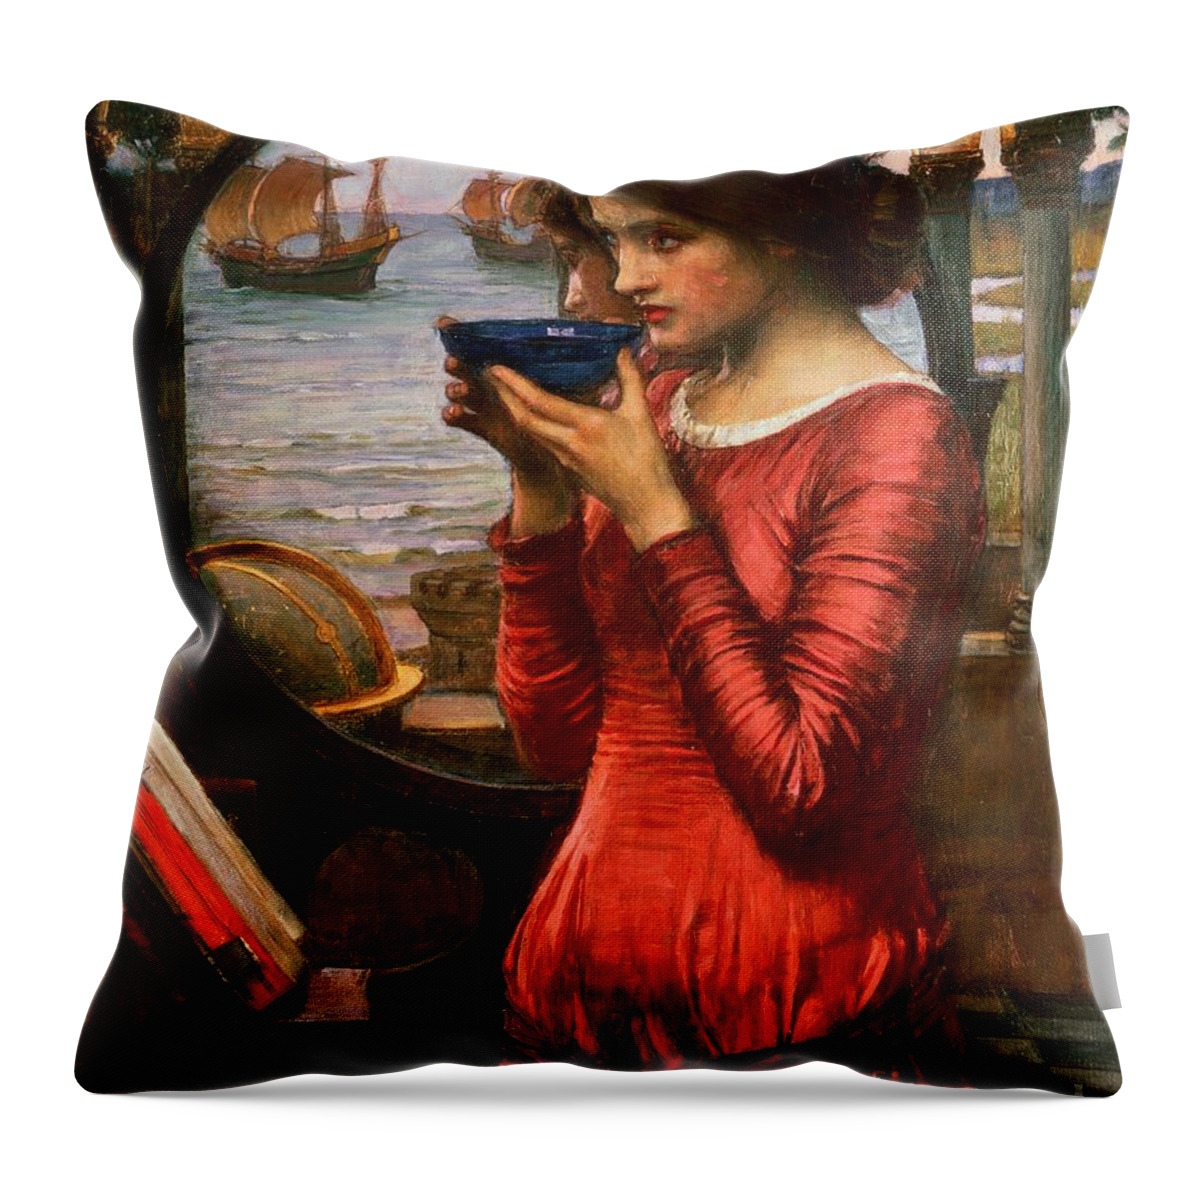 Boat; Globe; Poison; Blue Glass; Pre-raphaelite; Allegorical; Red Dress Throw Pillow featuring the painting Destiny by John William Waterhouse